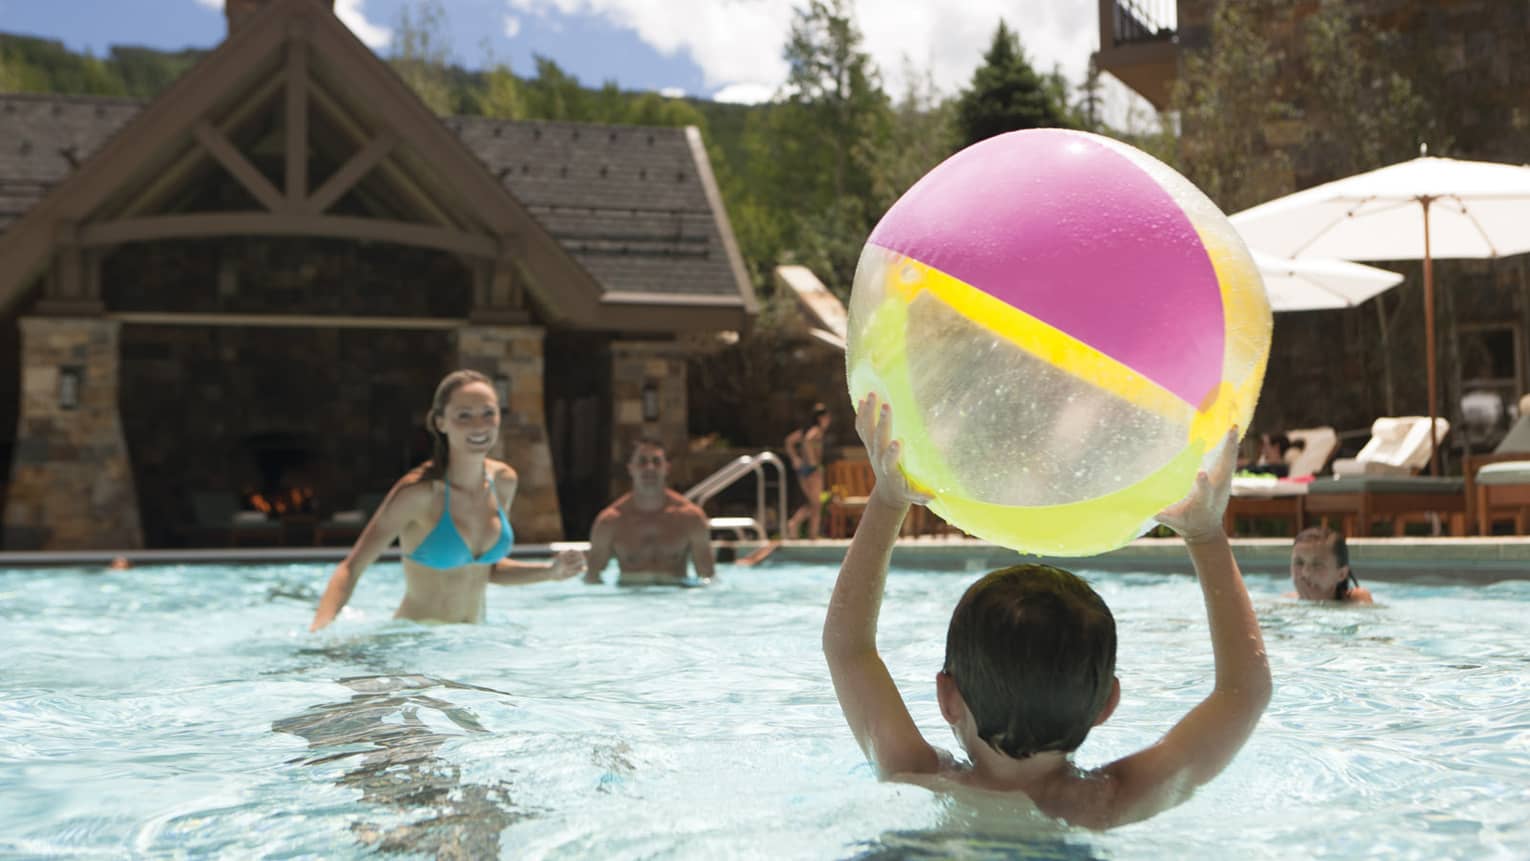 Child holds large, colorful beach ball over his head in swimming pool, prepares to throw it to parents nearby